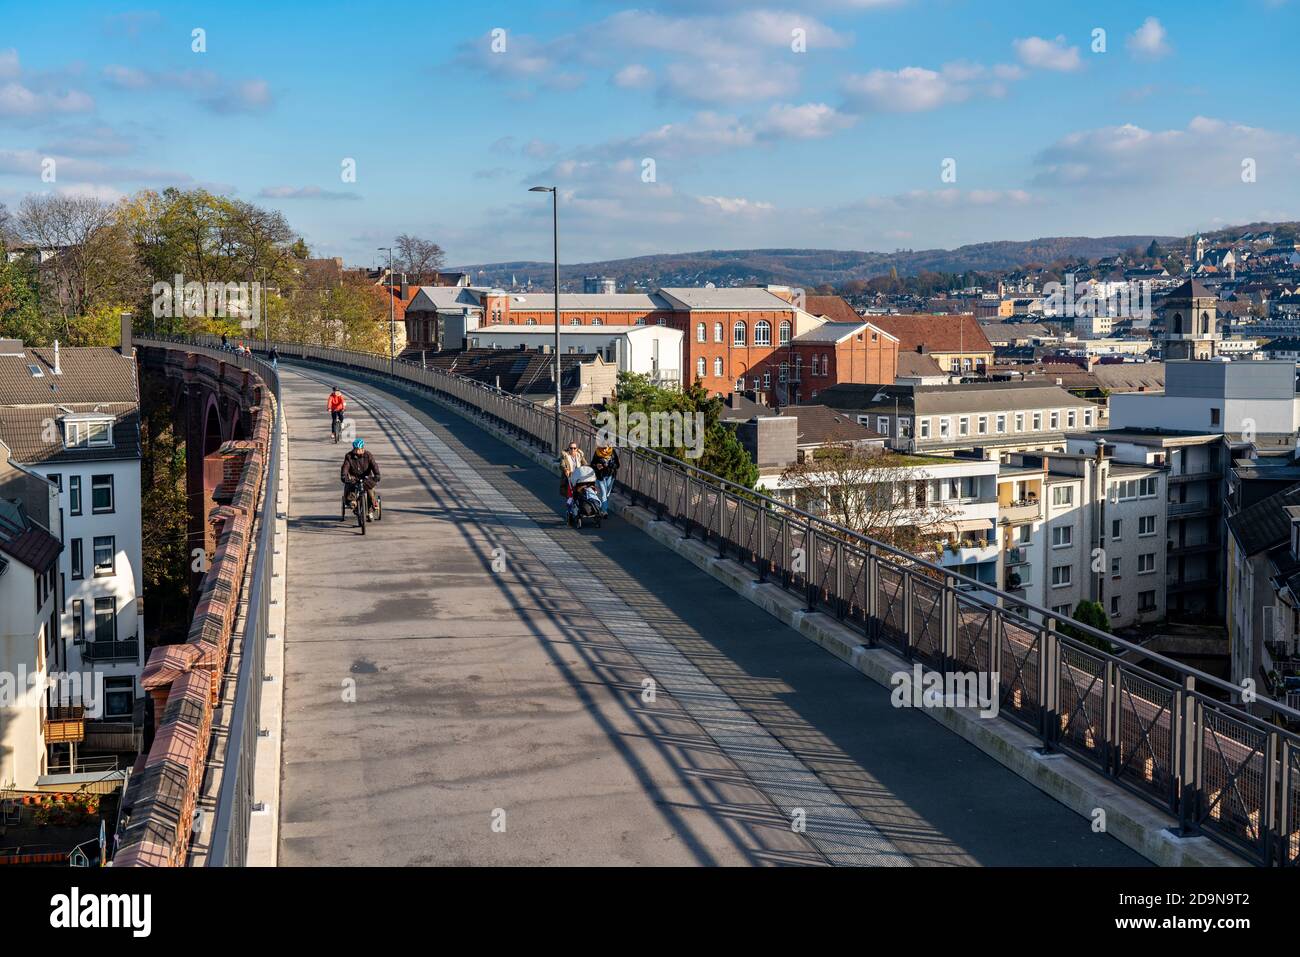 The Nordbahntrasse, a cycle path, footpath, on a former 22 KM railway line, along the West-East axis of Wuppertal, on the northern slope, with many tu Stock Photo